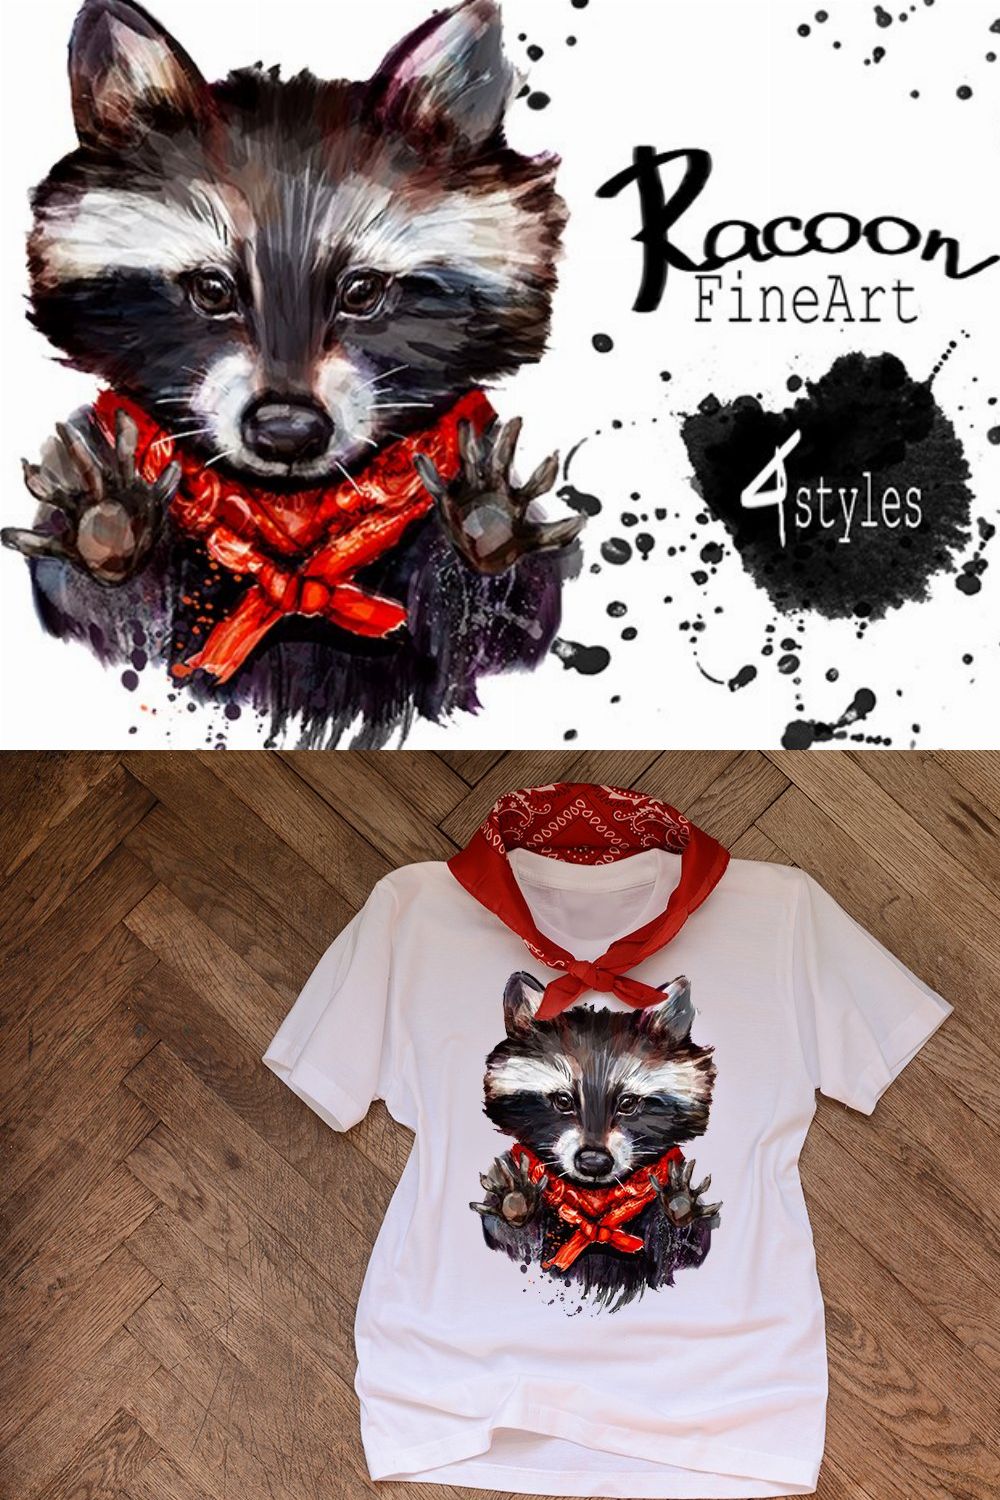 Set racoon fineart .4 styles pinterest preview image.